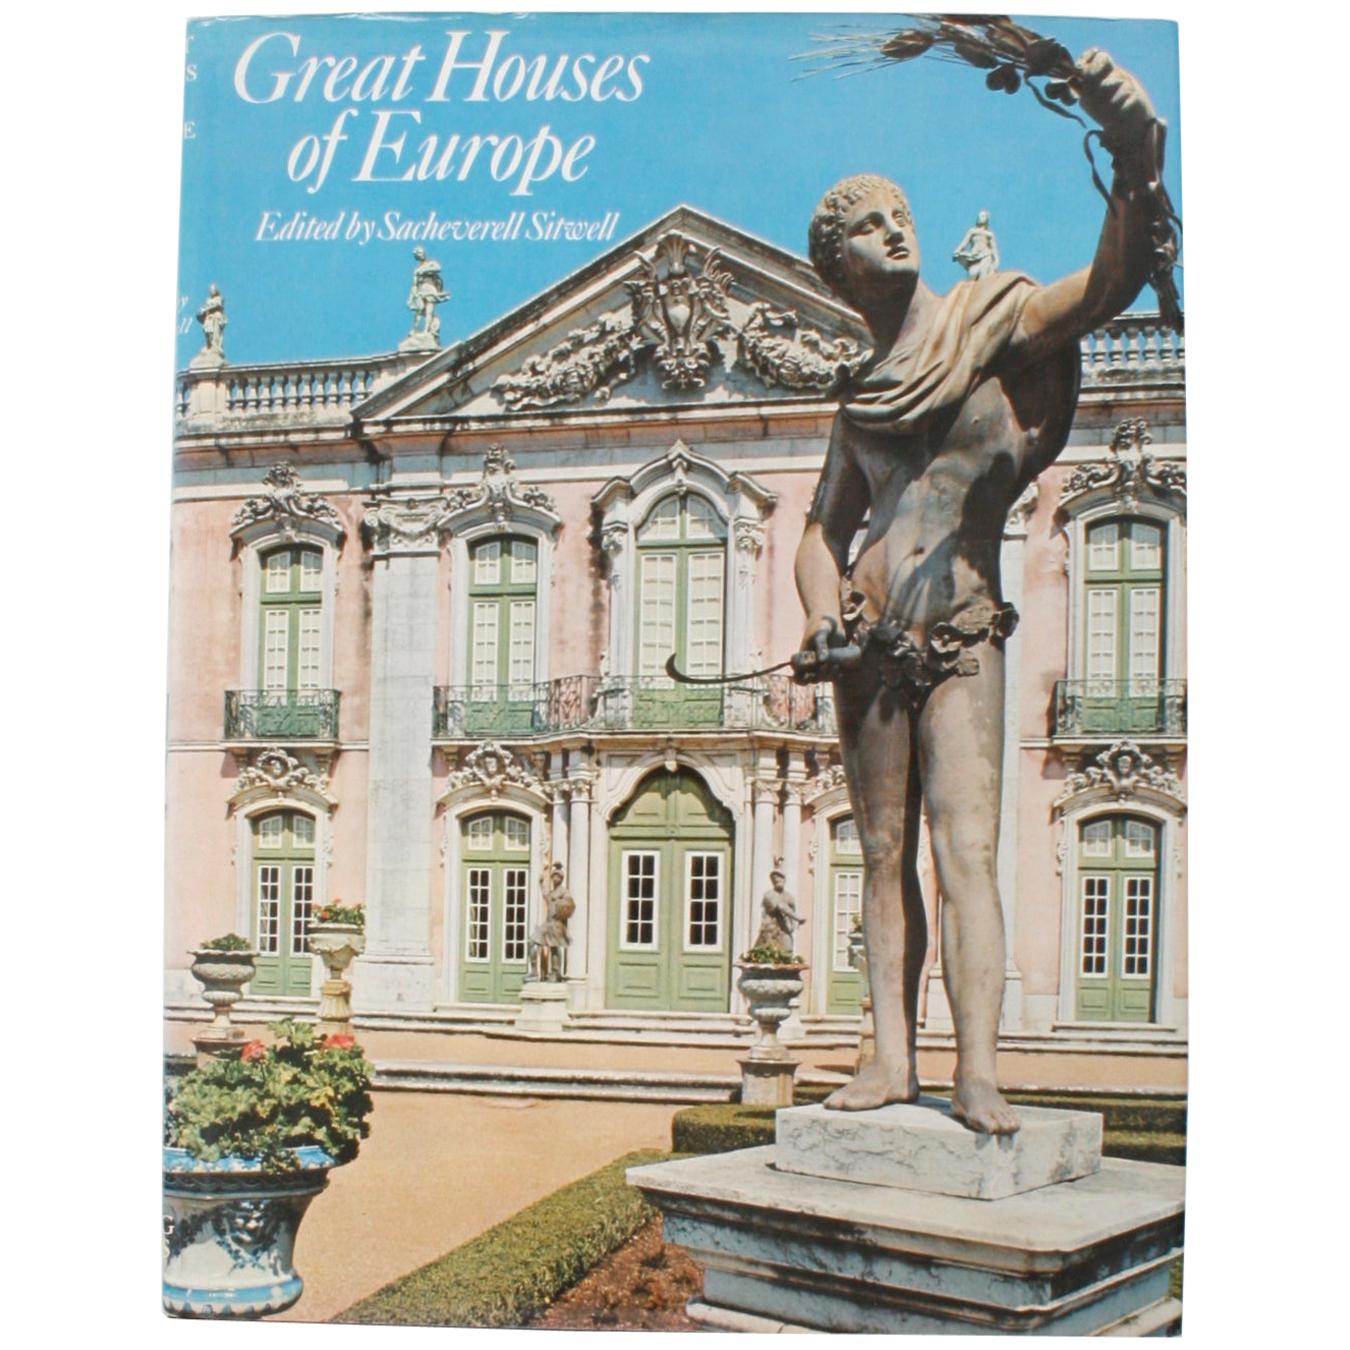 Great Houses of Europe by Sacheverell Sitwell